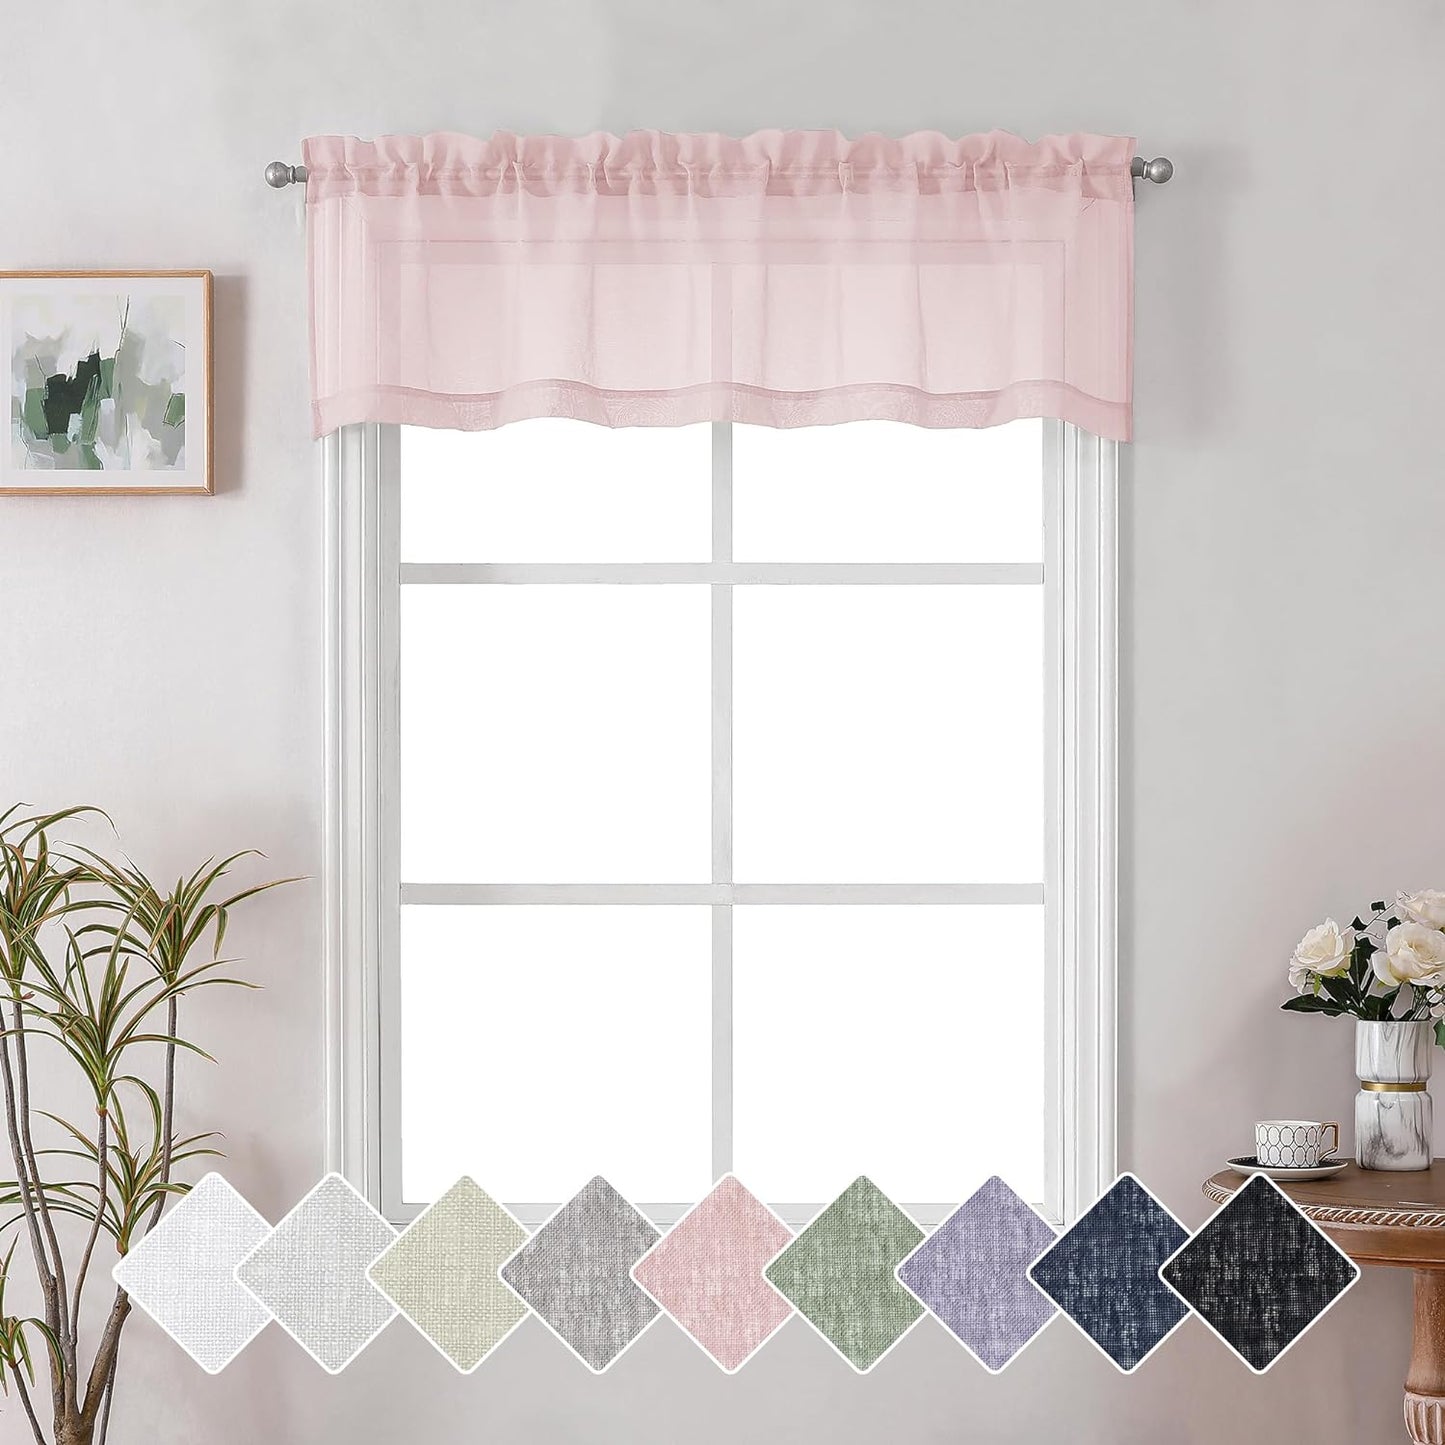 Lecloud Doris Faux Linen Sheer Grey Valance Curtains 14 Inches Length, Cafe Kitchen Bedroom Living Room Gauzy Silver Grey Curtain for Small Window, Slub Light Gray Valance Dual Rod Pockets 60X14 Inch  Lecloud Pink 60 W X 14 L 